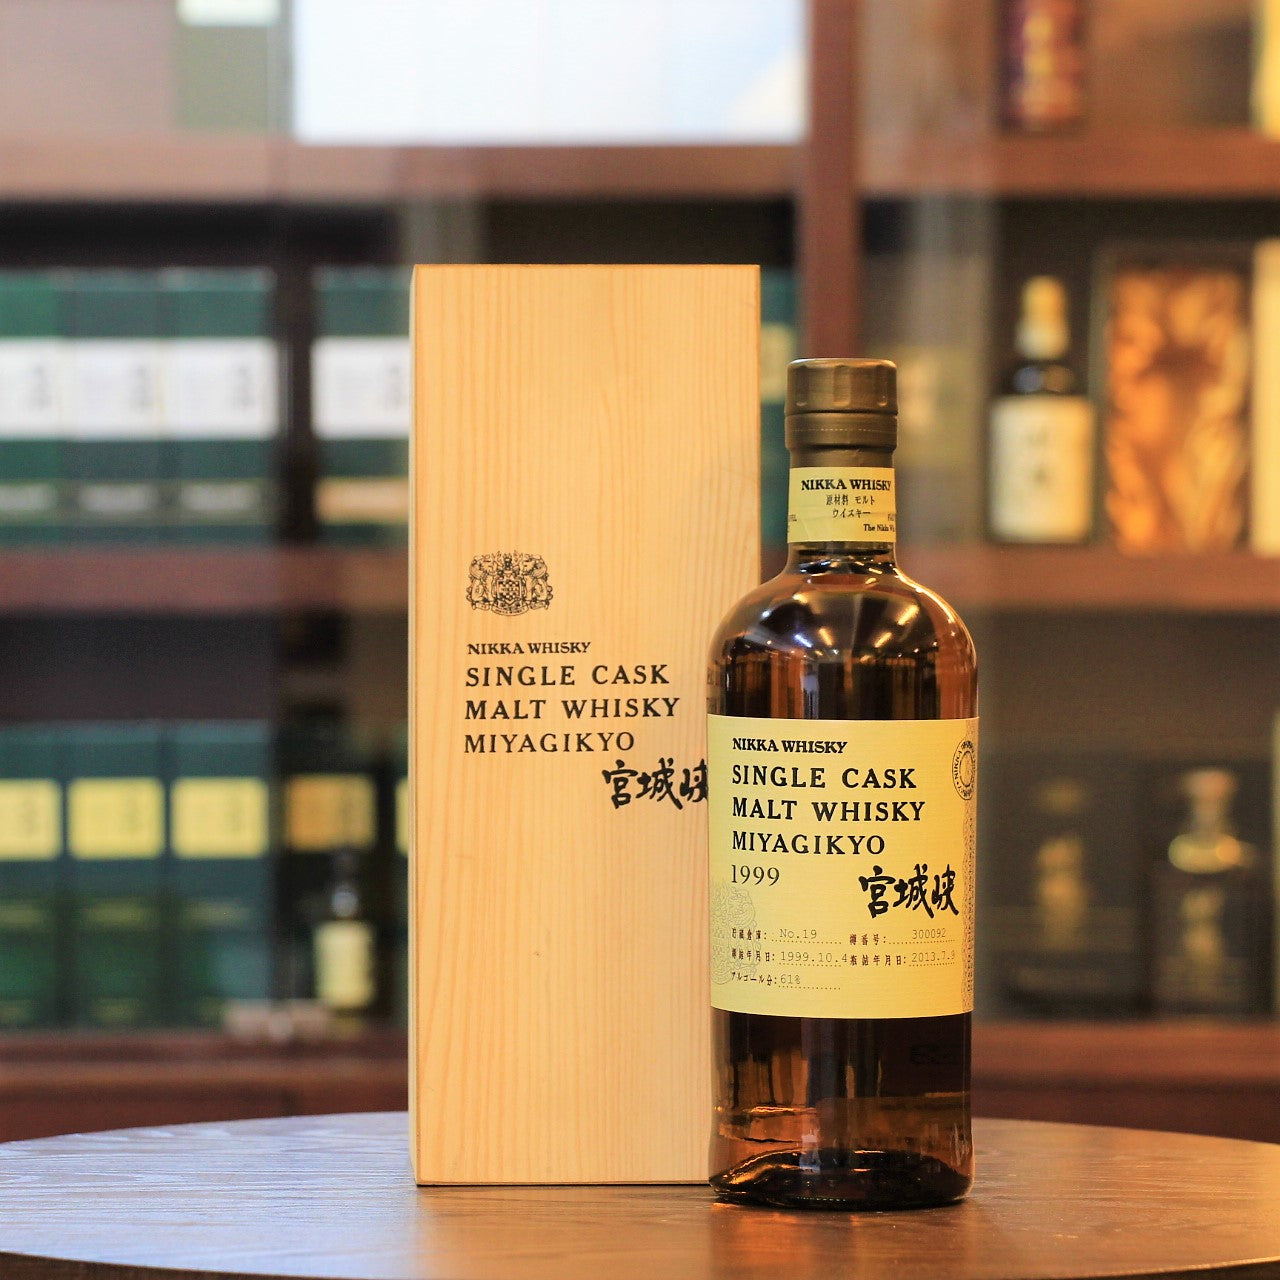 A 1999 vintage single cask Japanese whisky from Nikka Miyagikyo distillery. It was aged in Cask #300092 for over 13 years in the warehouse #19. 